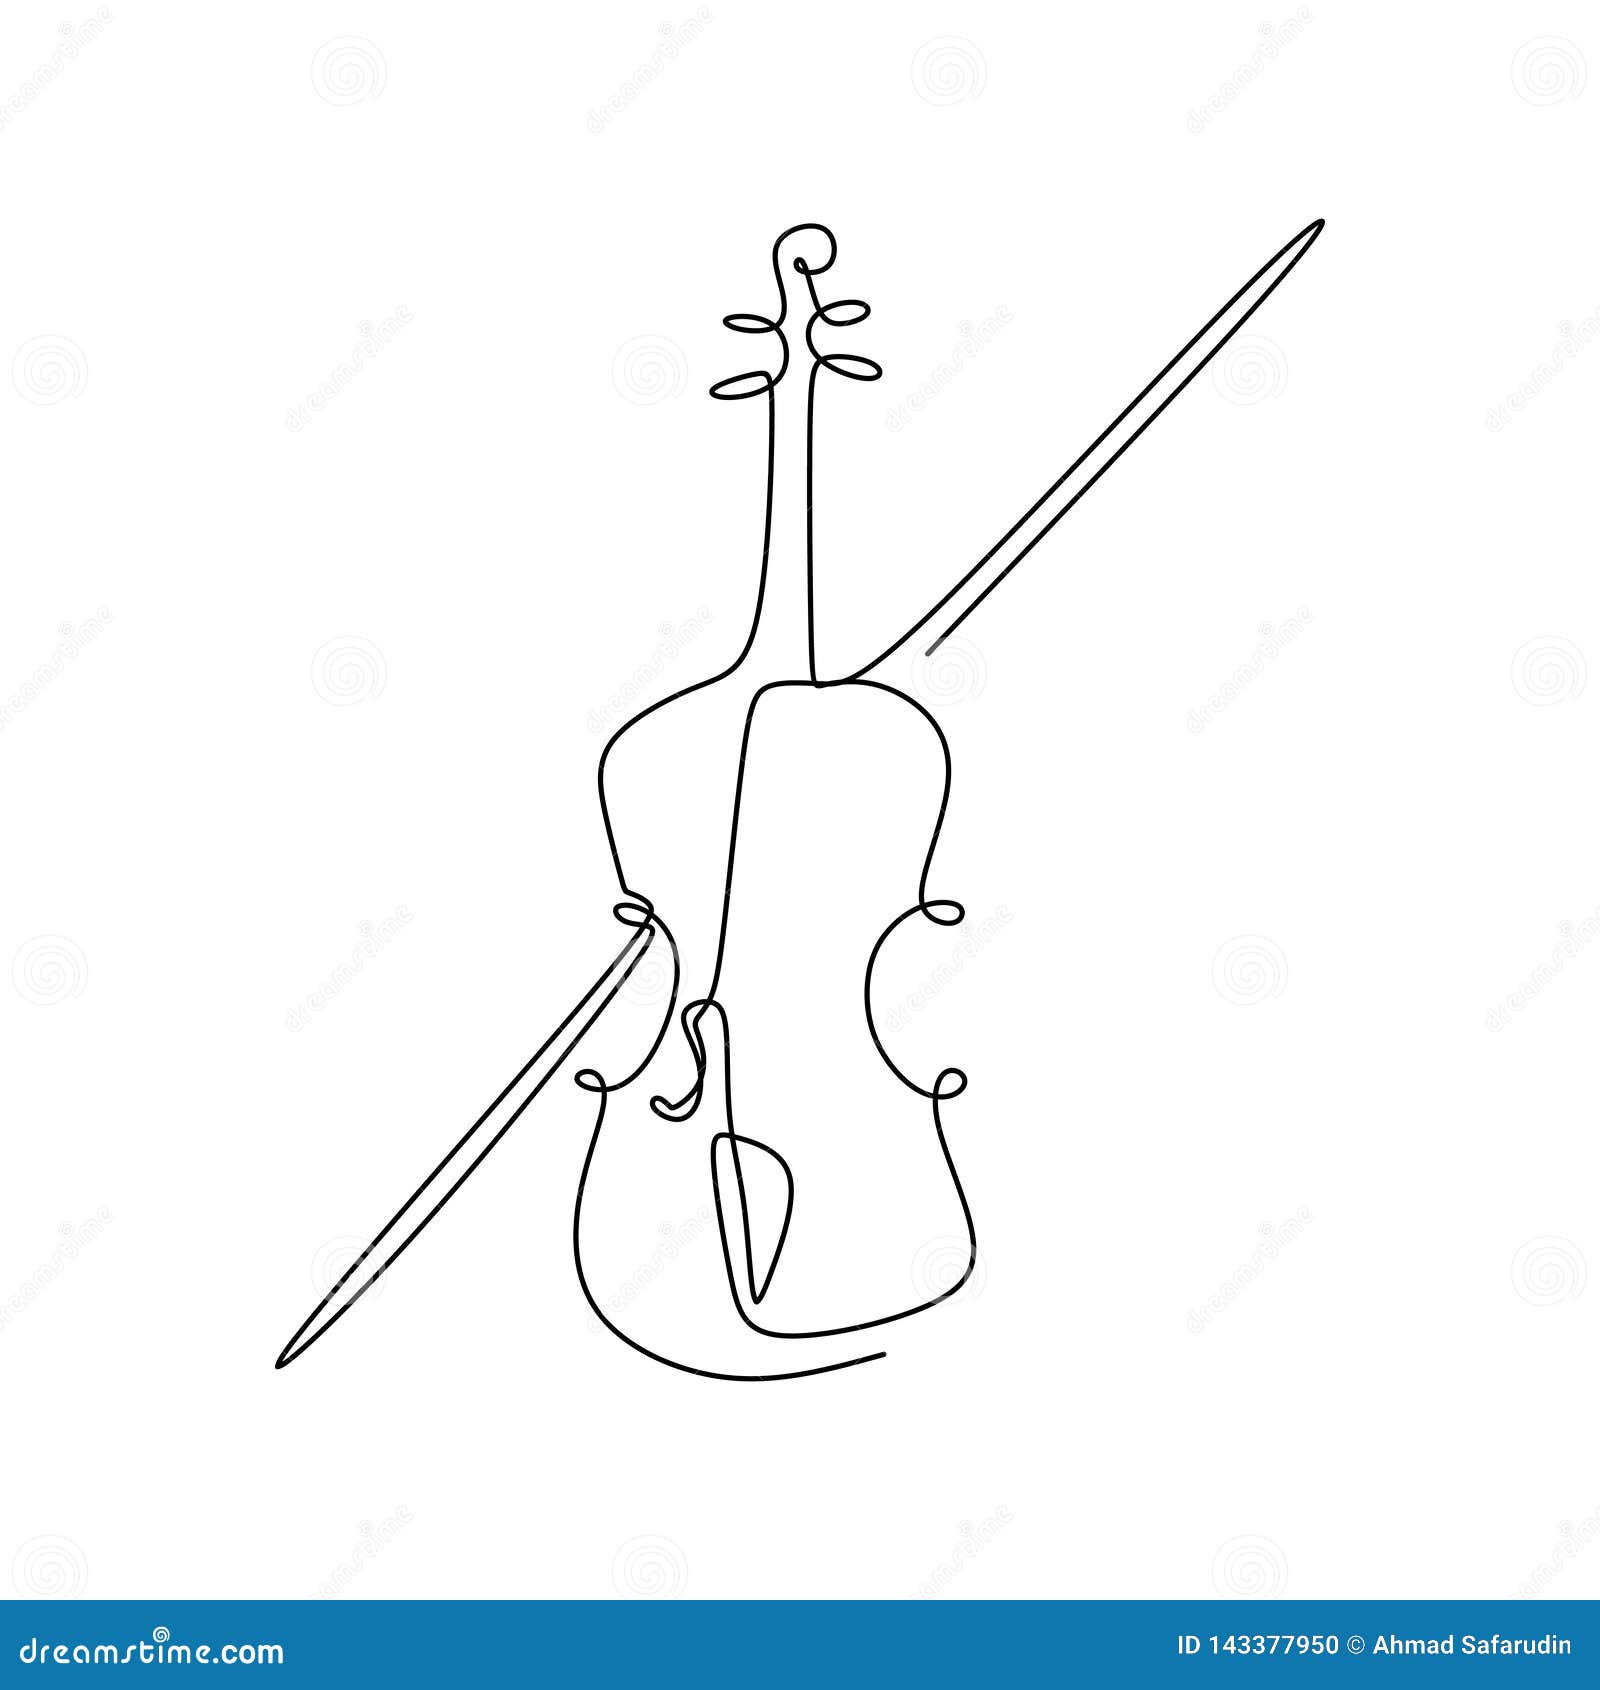 continuous line drawing of a jazz instrument